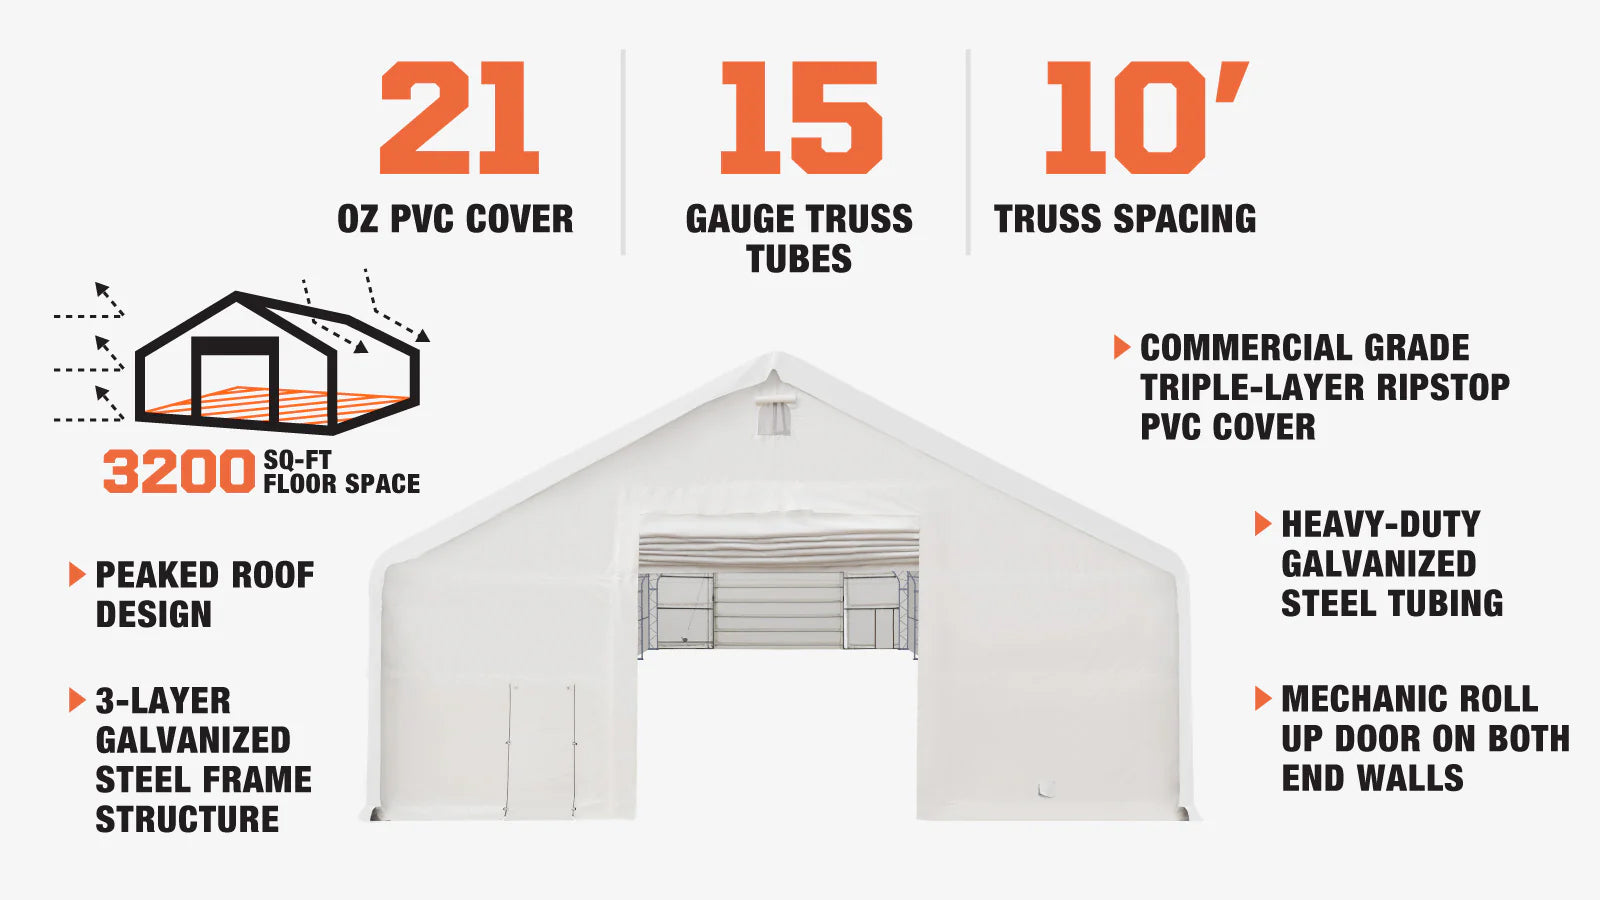 TMG Industrial 40' x 80' Dual Truss Storage Shelter with Heavy Duty 21 oz PVC Cover & Drive Through Doors, TMG-DT4081 (Previously DT4080)-description-image